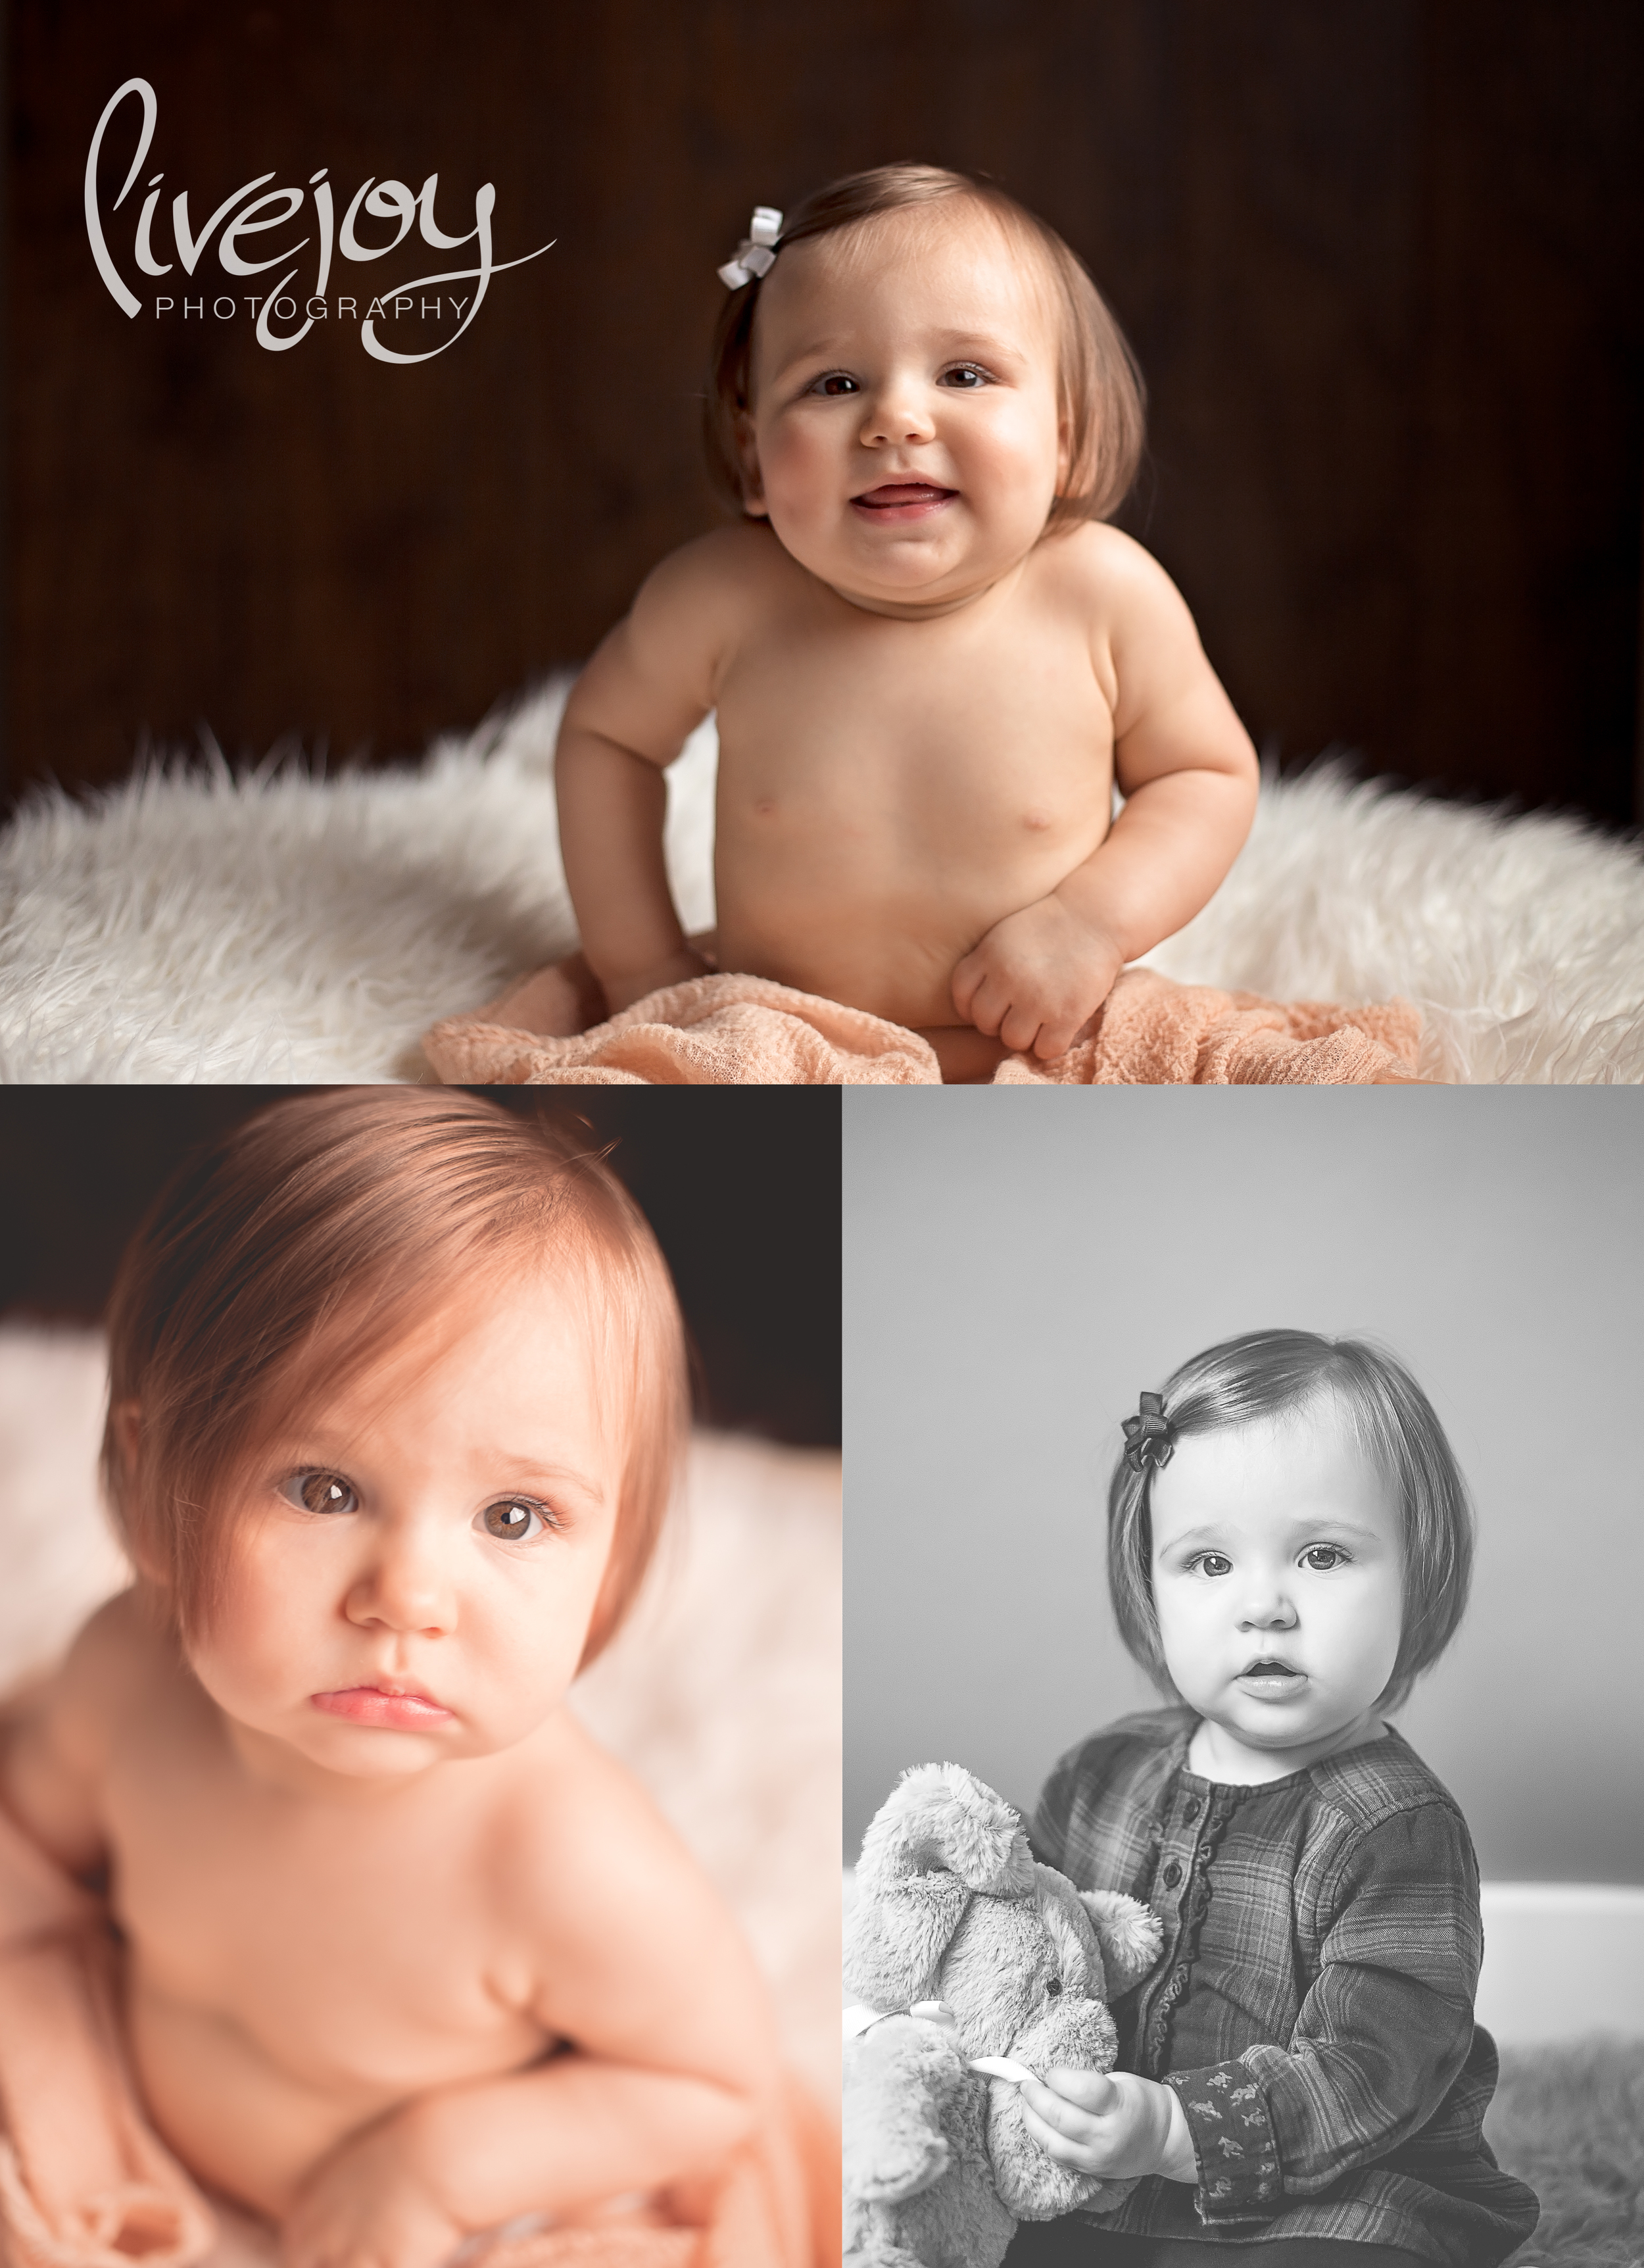 One Year Baby Photography | Oregon | LiveJoy Photography